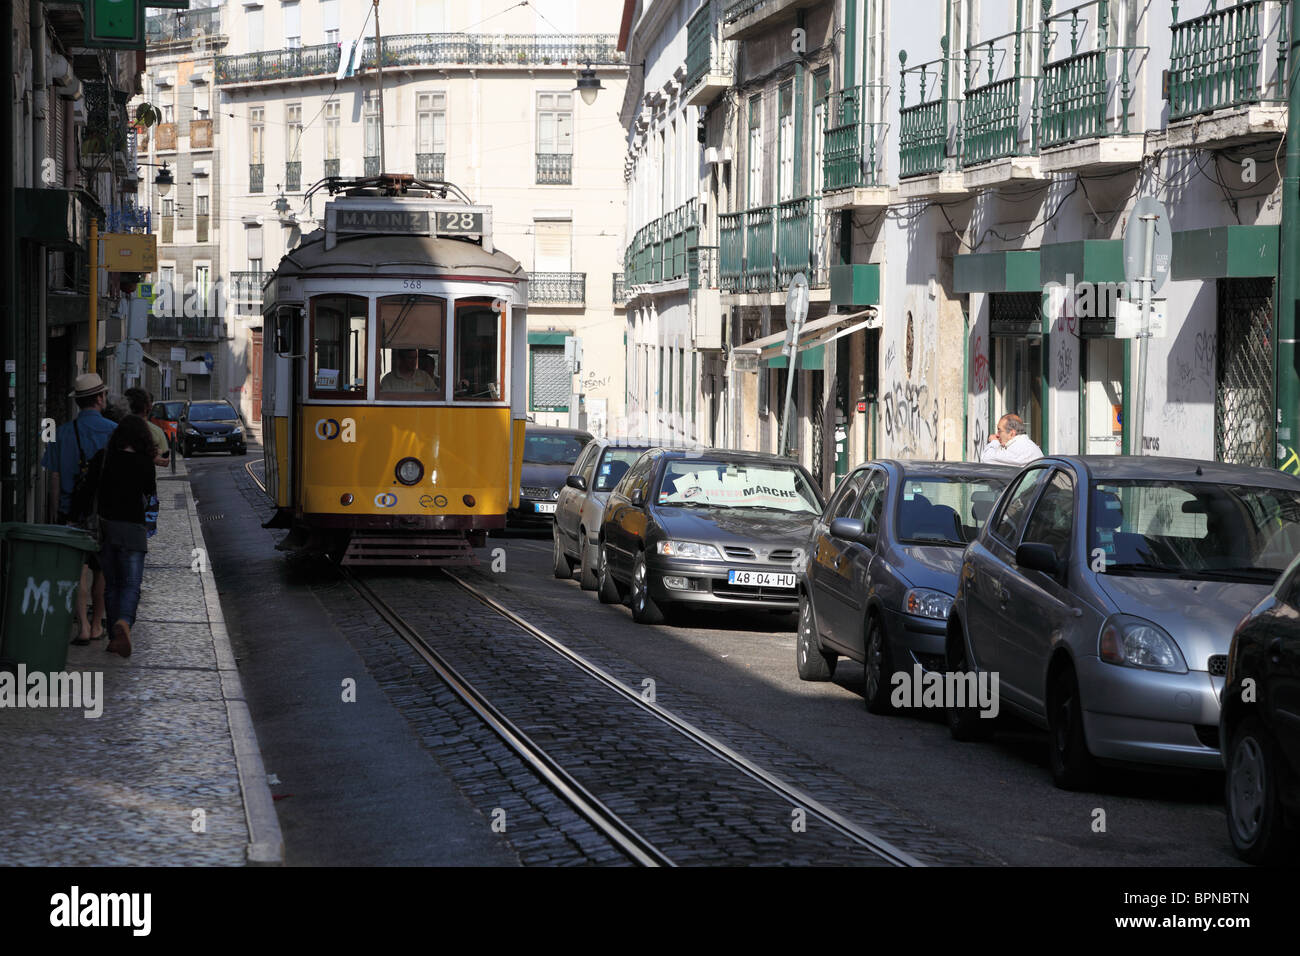 Vintage Tram in the street of Lisbon, Portugal. Stock Photo